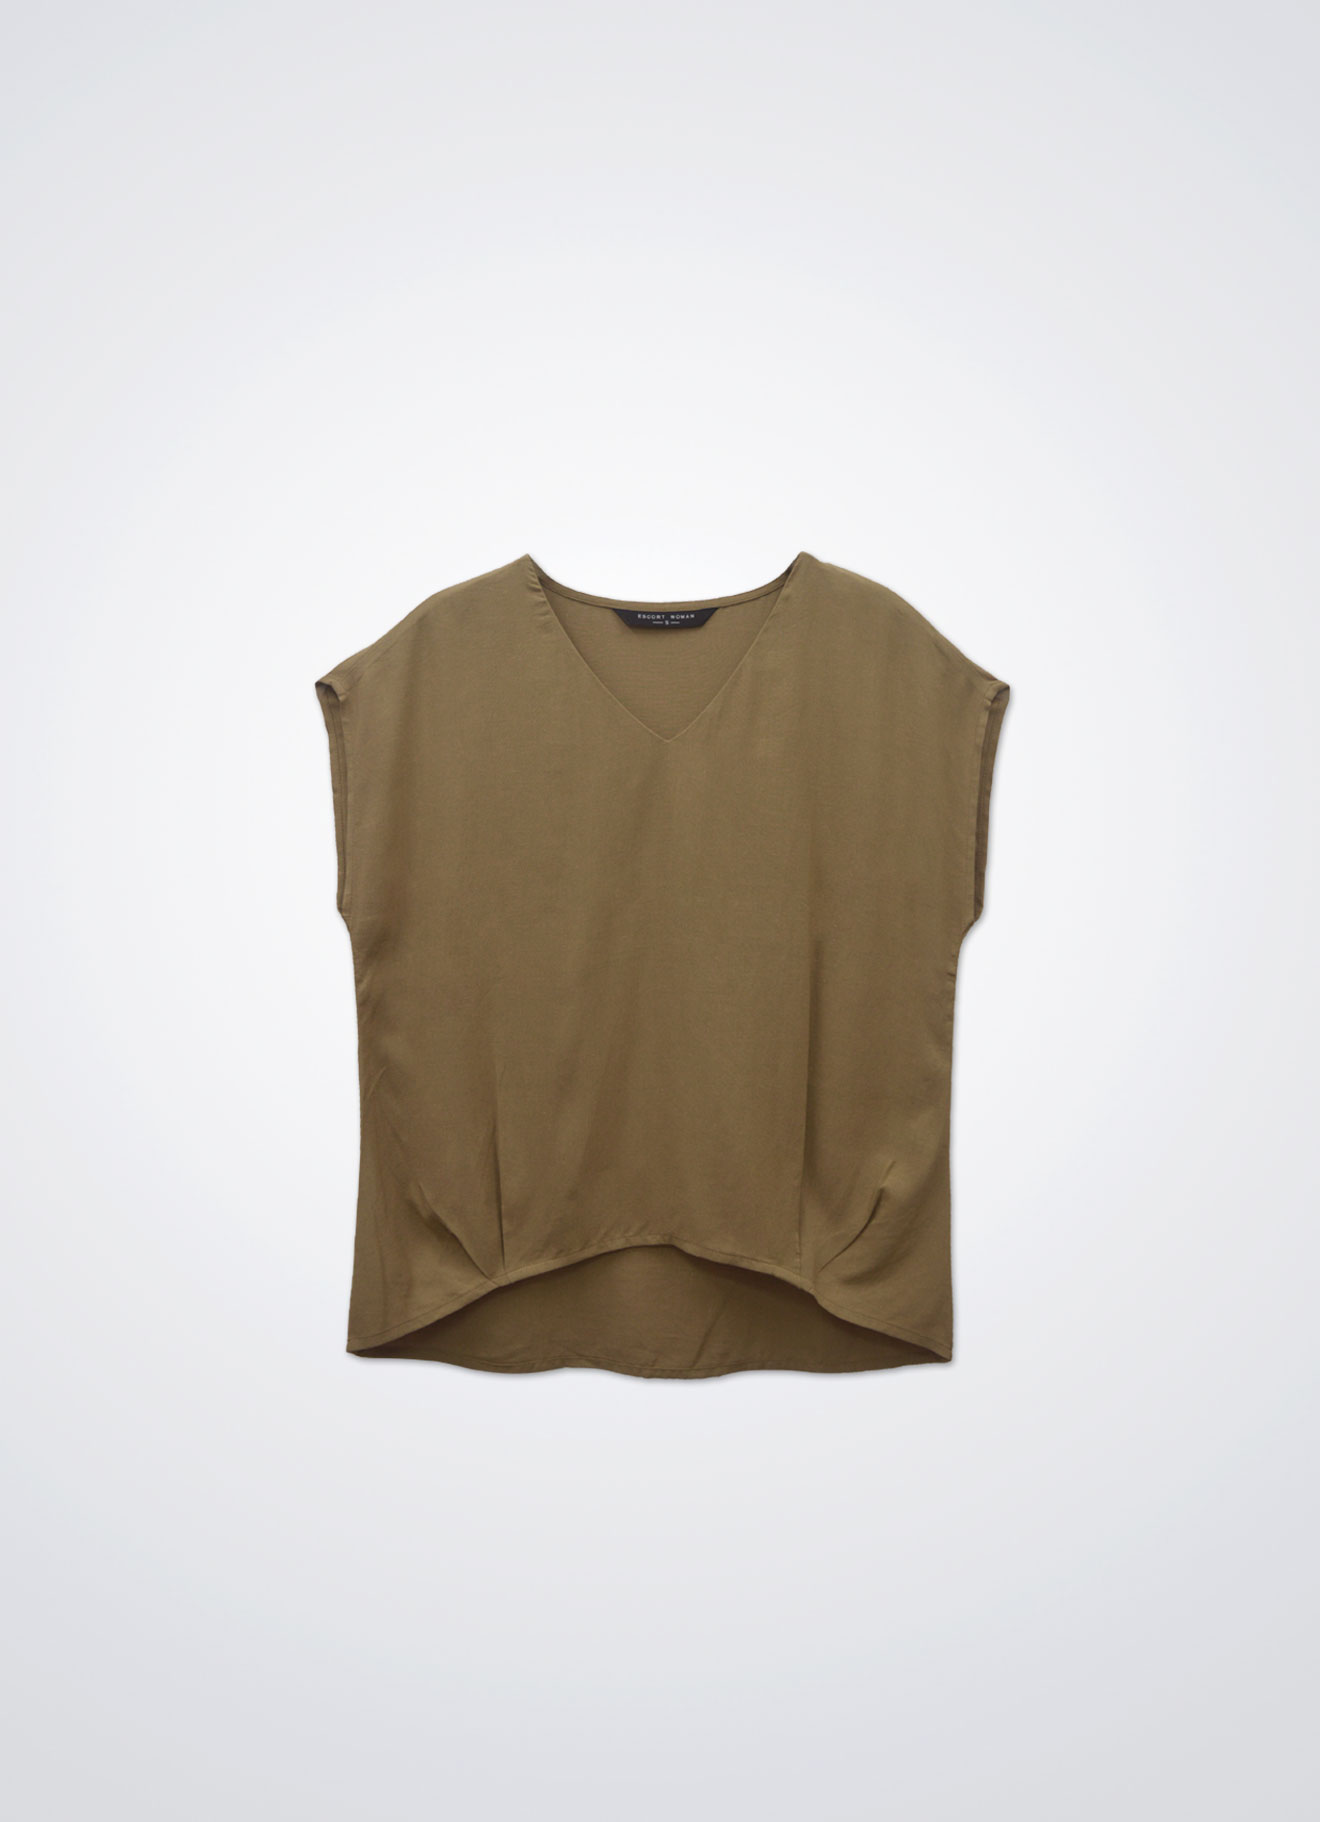 Tan by Sleeve Blouse